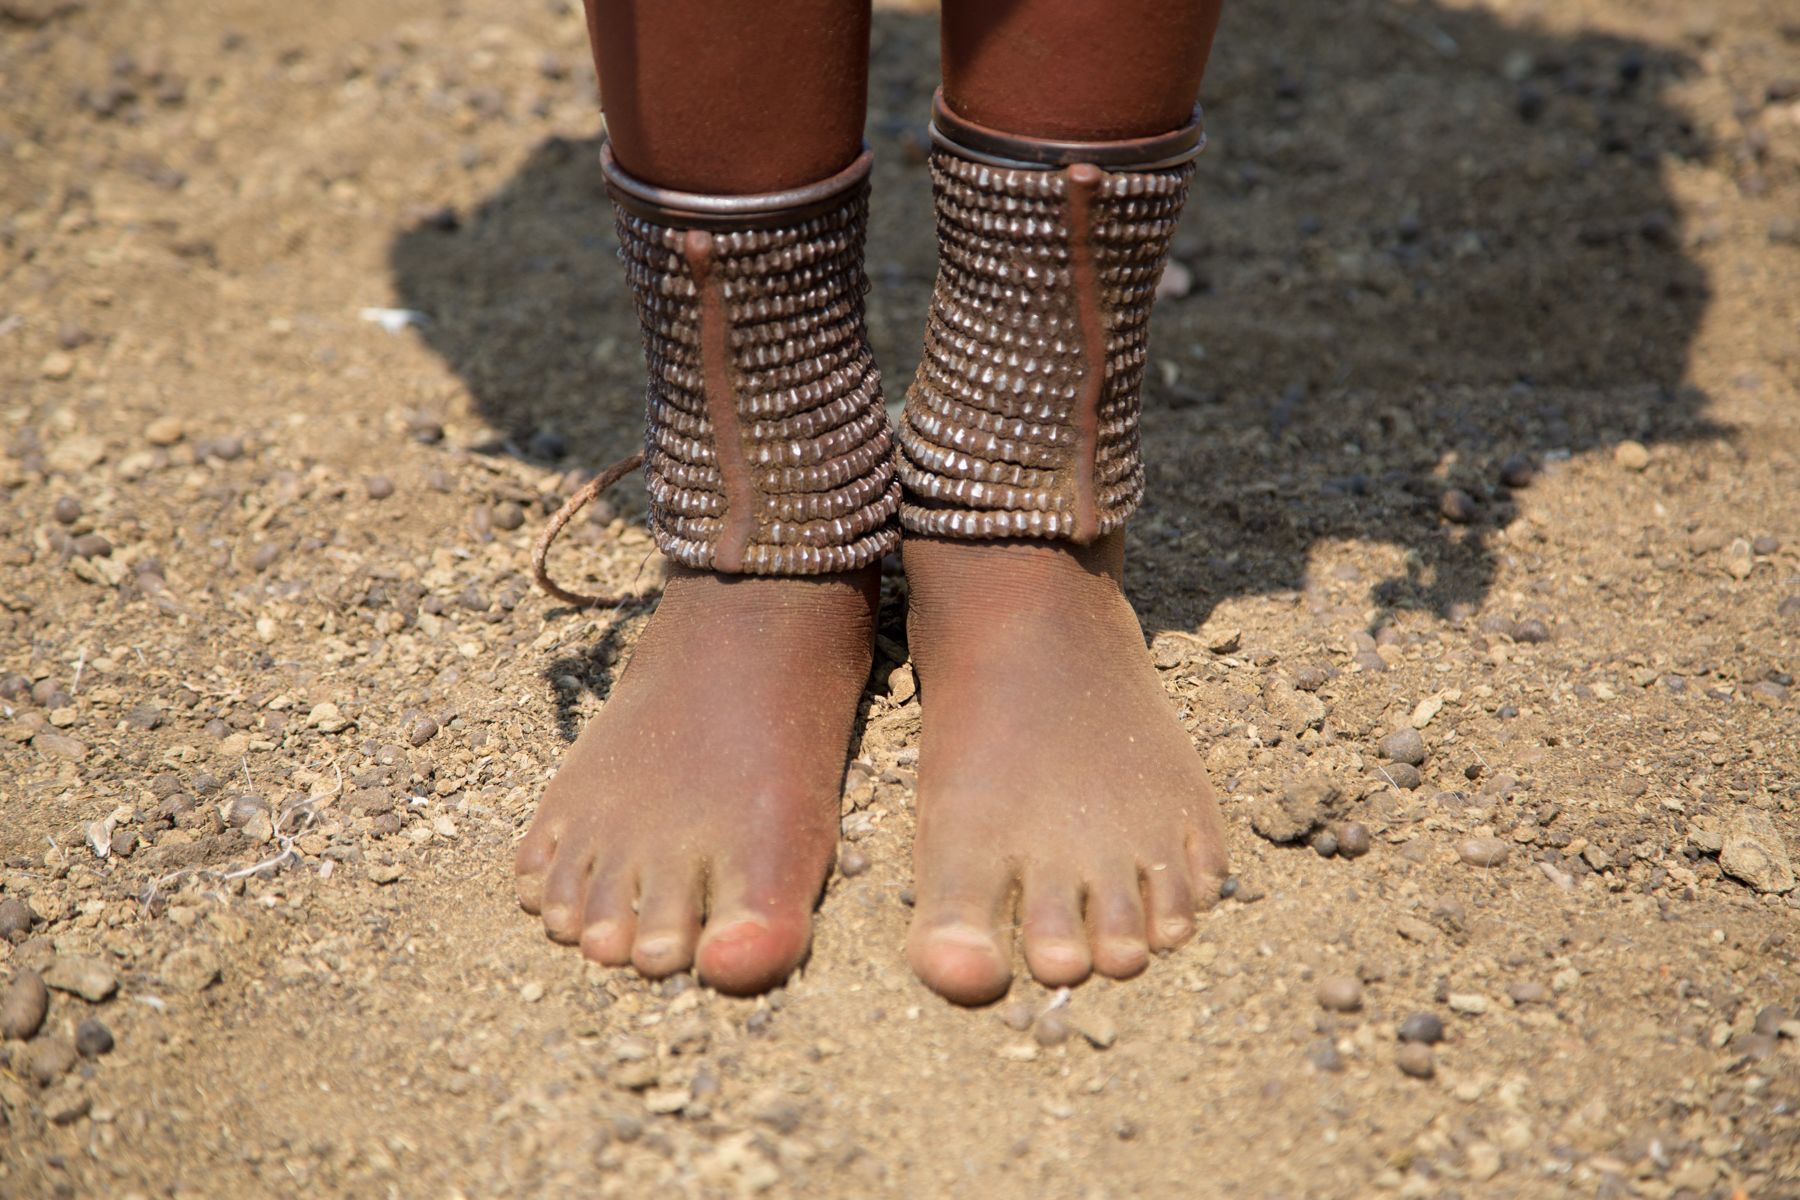 The feet of a Himba woman on our photo tour of Namibia